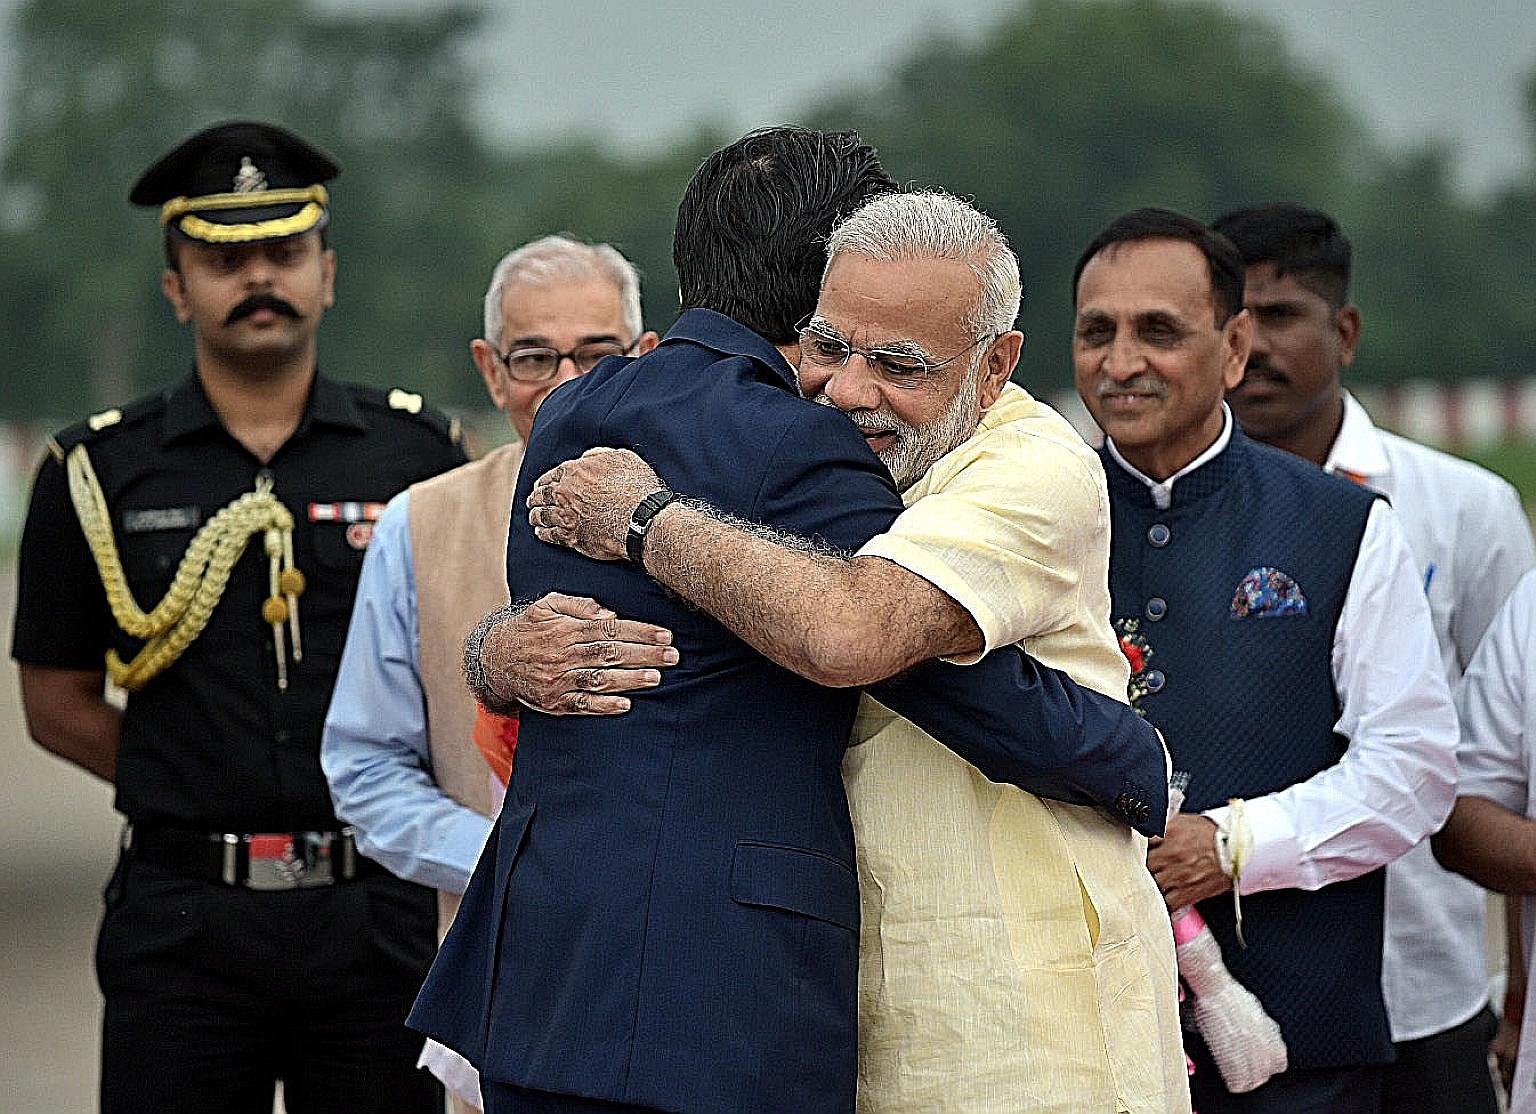 Mr Narendra Modi and Mr Shinzo Abe sharing a bear hug in Gujarat last week - a sign of warm relations between their two countries.